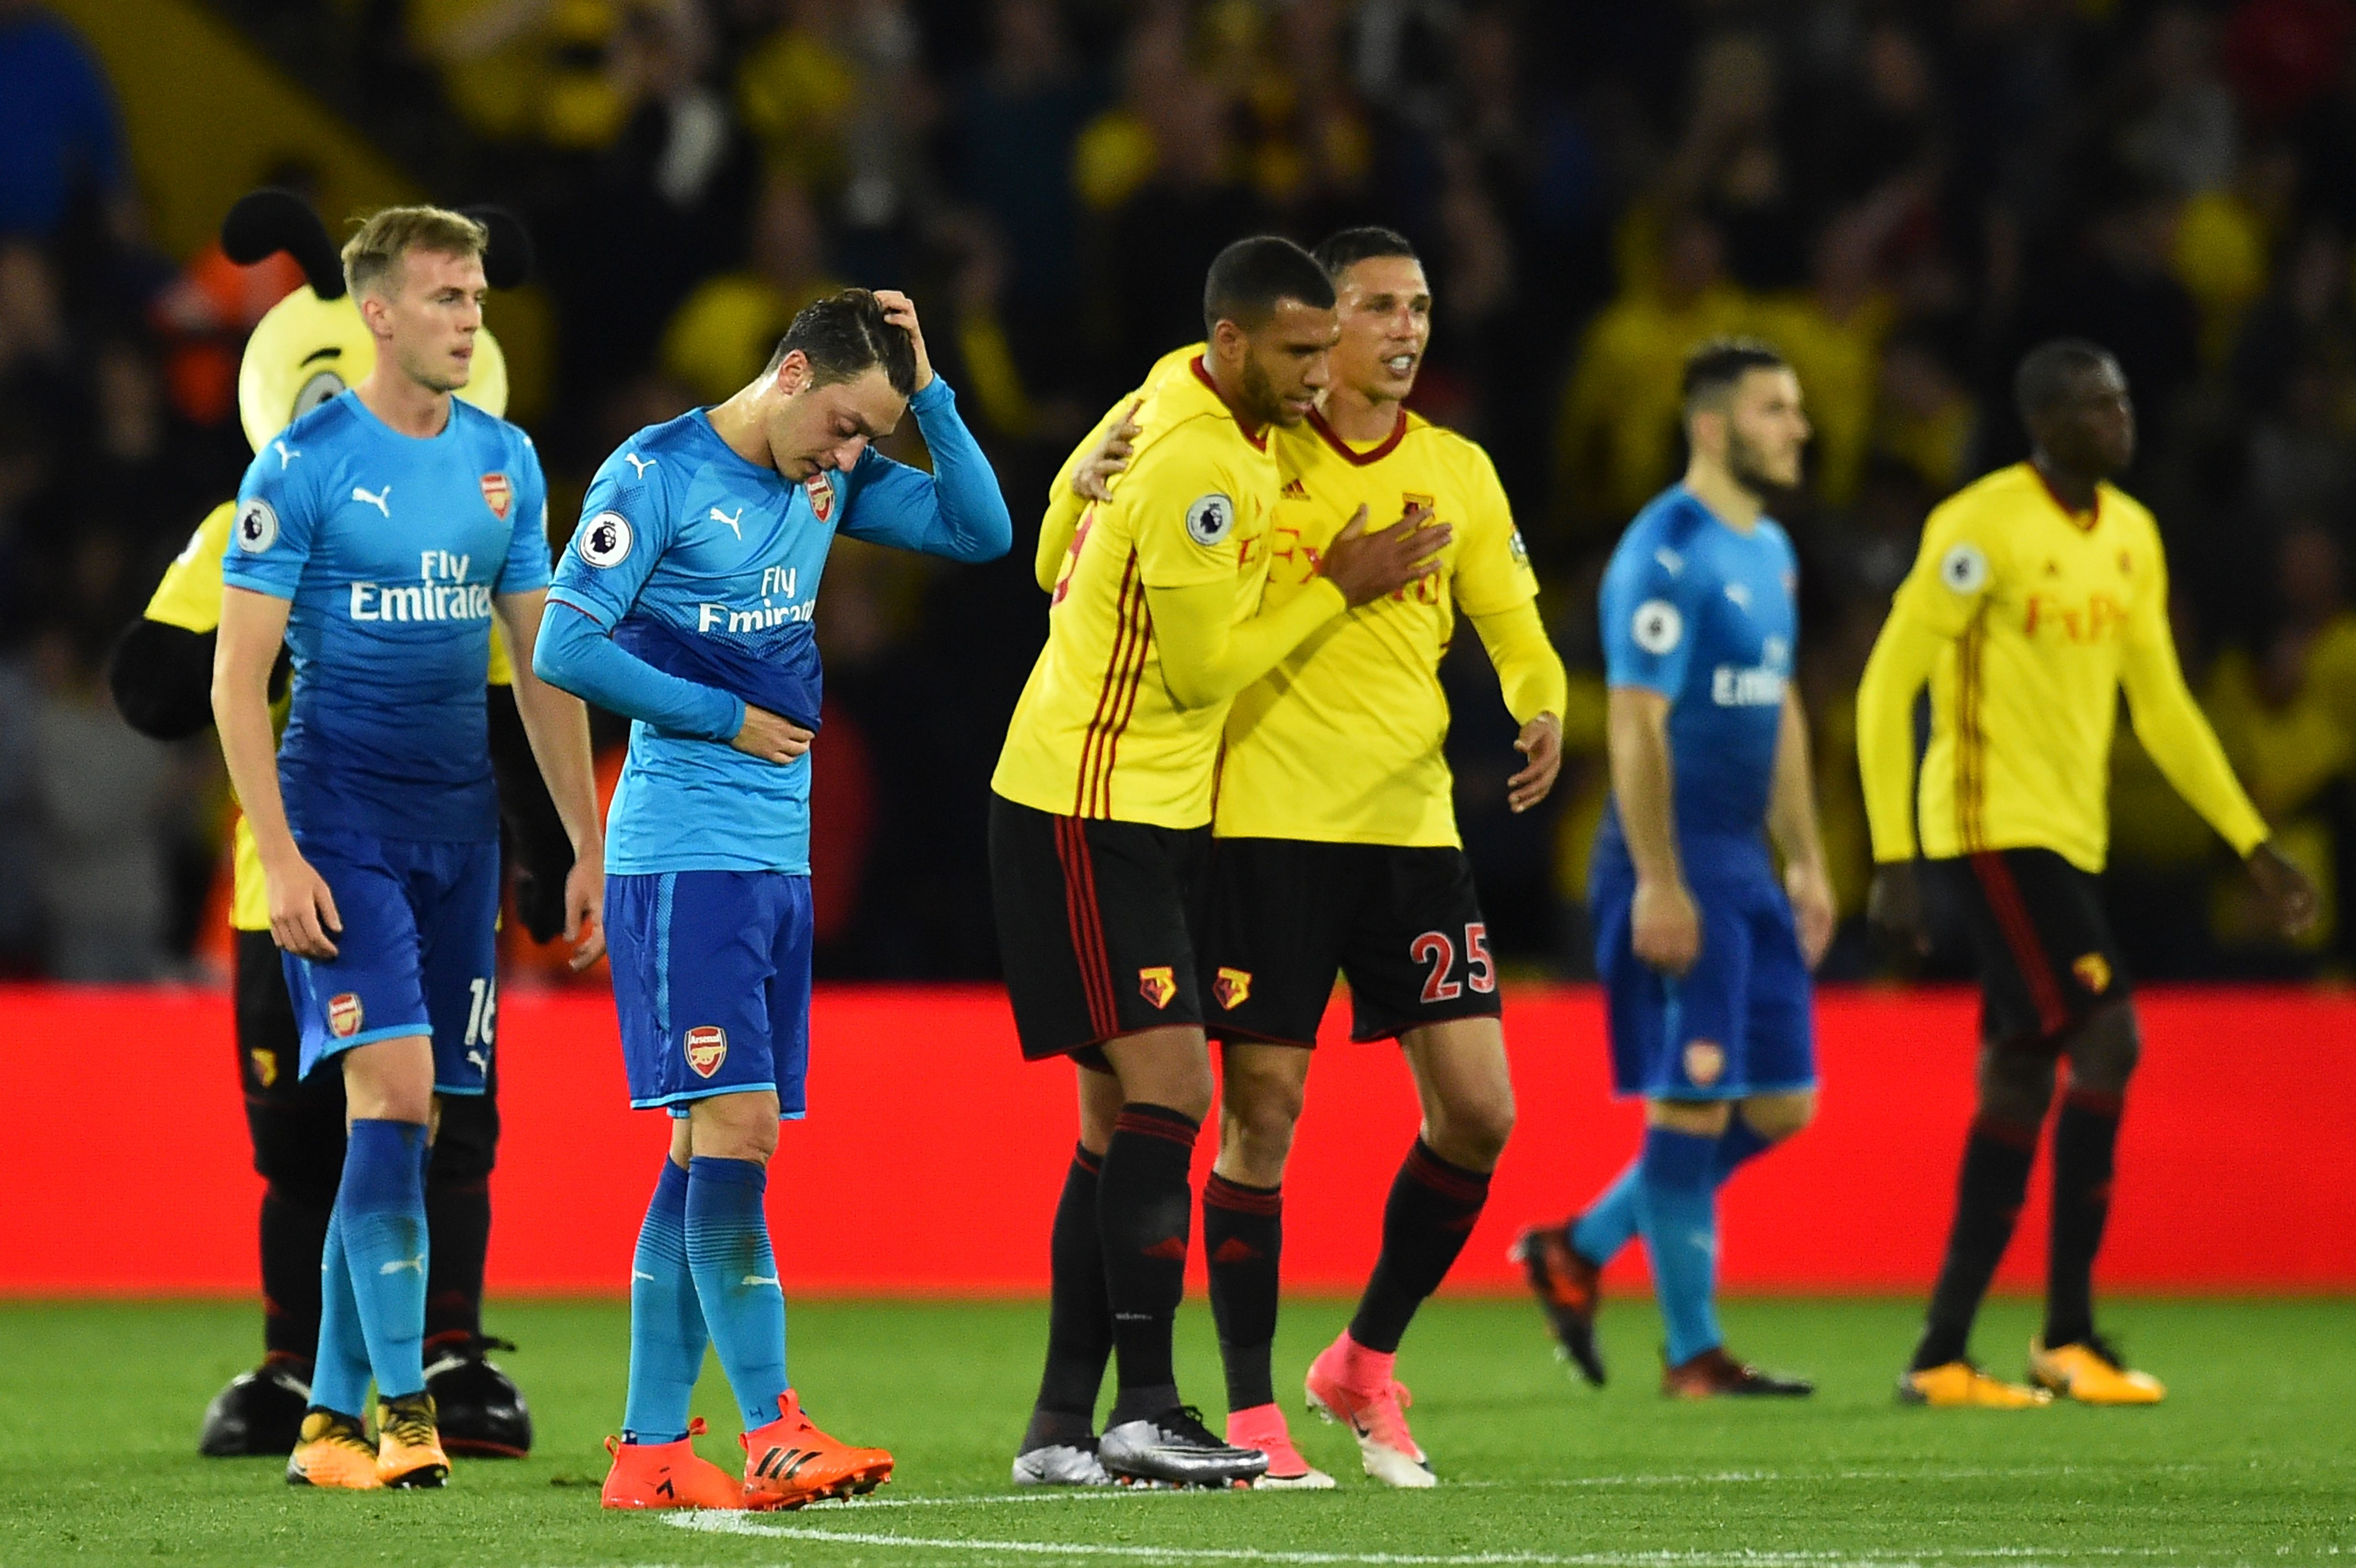 Arsenal's German midfielder Mesut Ozil (2L) reacts at the final whistle as Watford's English striker Troy Deeney (CL) and Watford's German-born Greek midfielder José Holebas (CR) during the English Premier League football match between Watford and Arsenal at Vicarage Road Stadium in Watford, north of London on October 14, 2017.
Watford won 2-1. / AFP PHOTO / Glyn KIRK / RESTRICTED TO EDITORIAL USE. No use with unauthorized audio, video, data, fixture lists, club/league logos or 'live' services. Online in-match use limited to 75 images, no video emulation. No use in betting, games or single club/league/player publications.  /         (Photo credit should read GLYN KIRK/AFP/Getty Images)